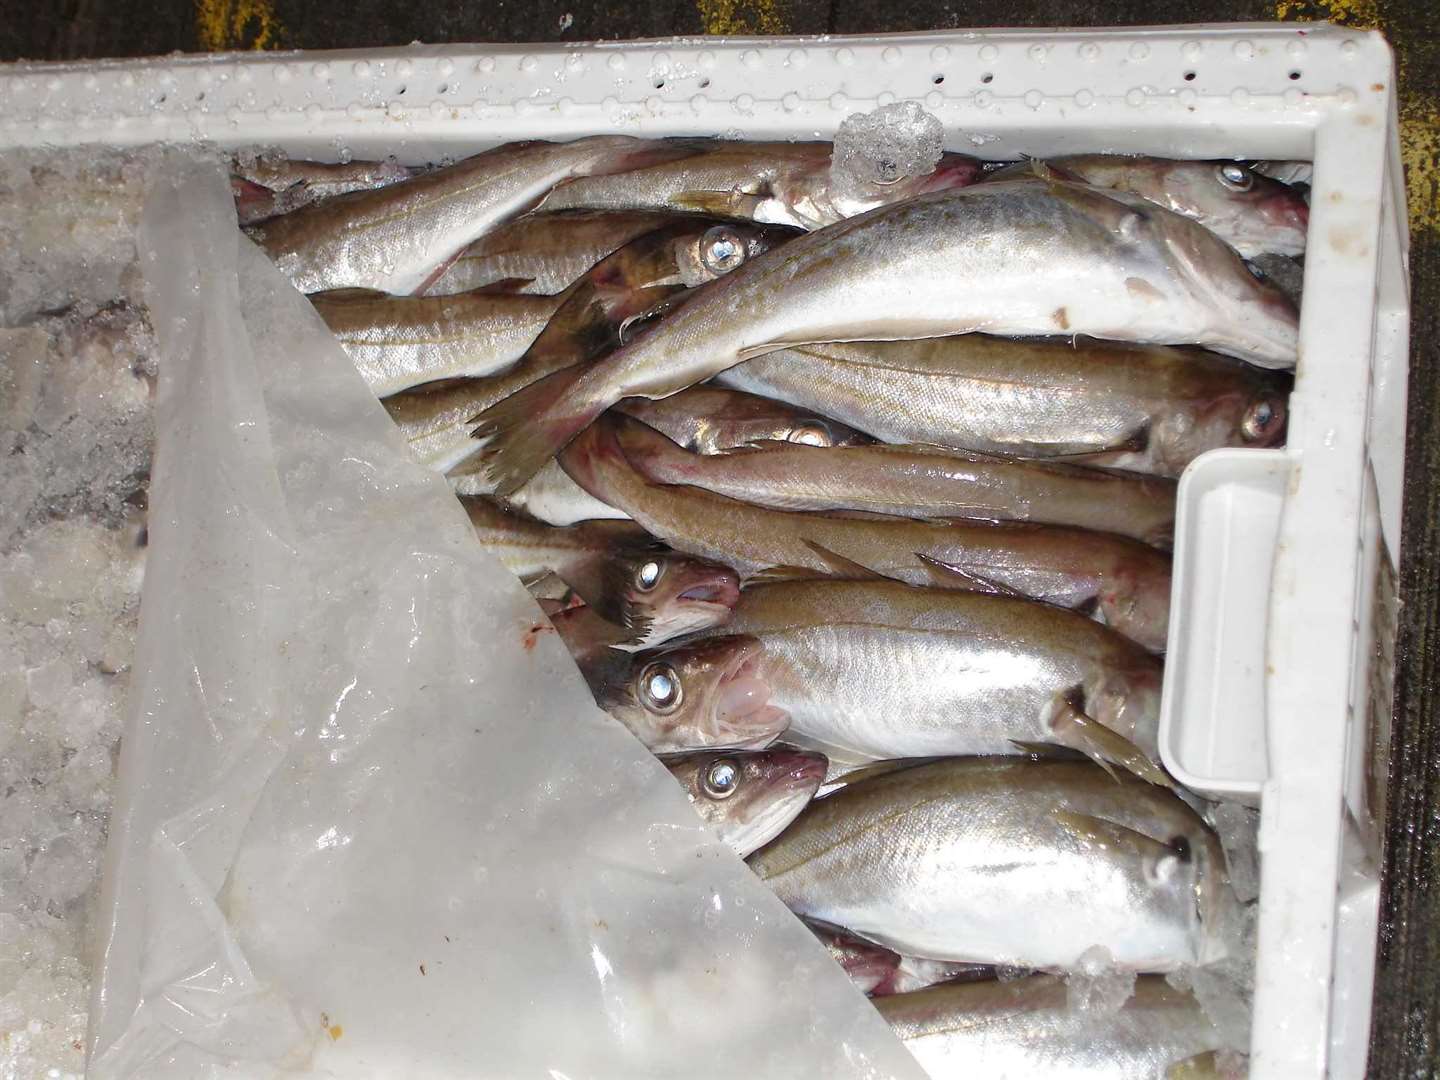 Scottish fish exporters have expressed anger over port delays in France.